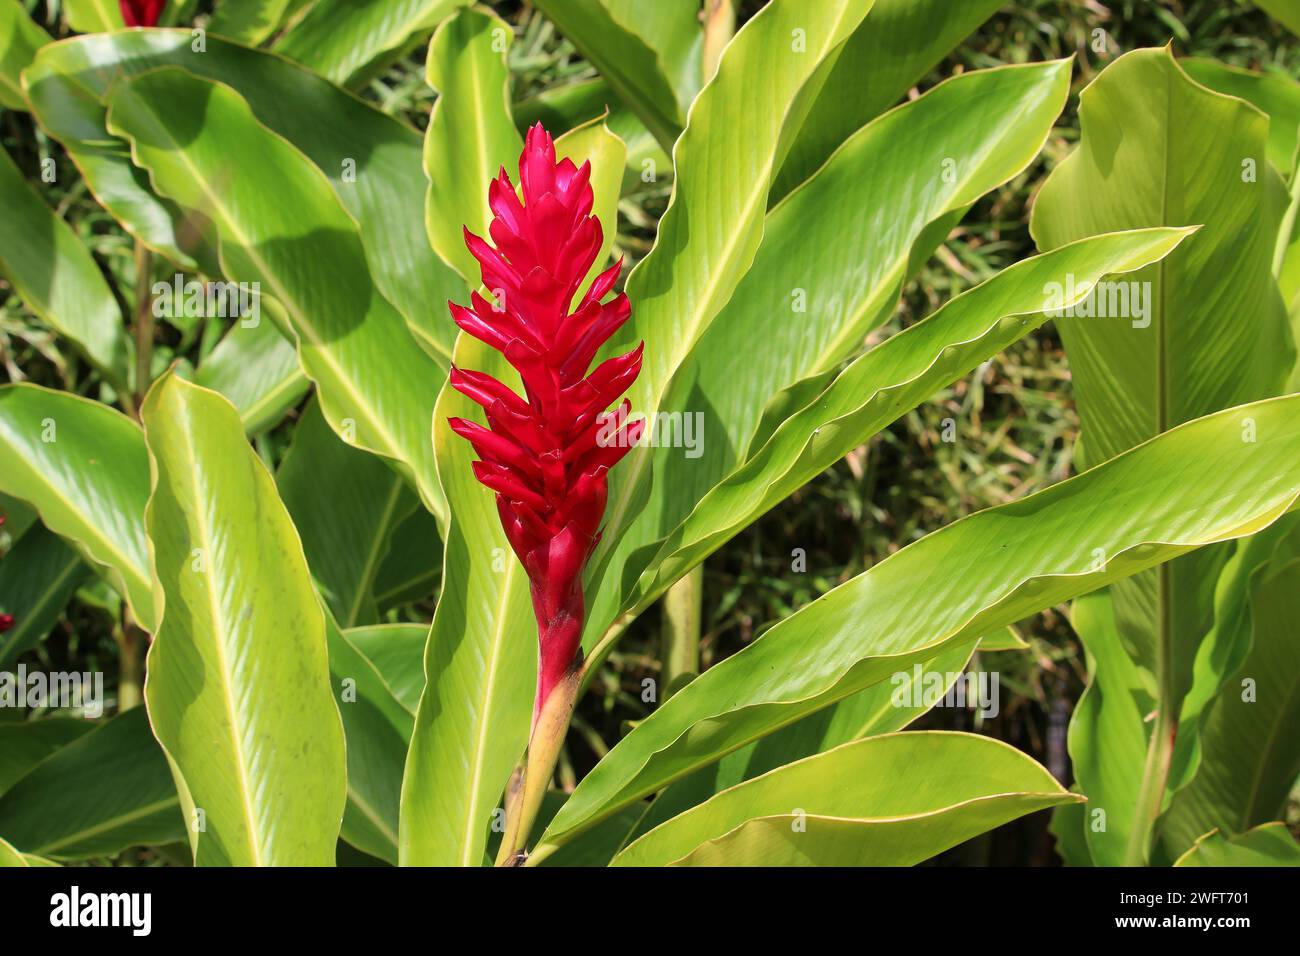 Red ginger flower (Alpinia purpurata) surrounded by bright green leaves Stock Photo